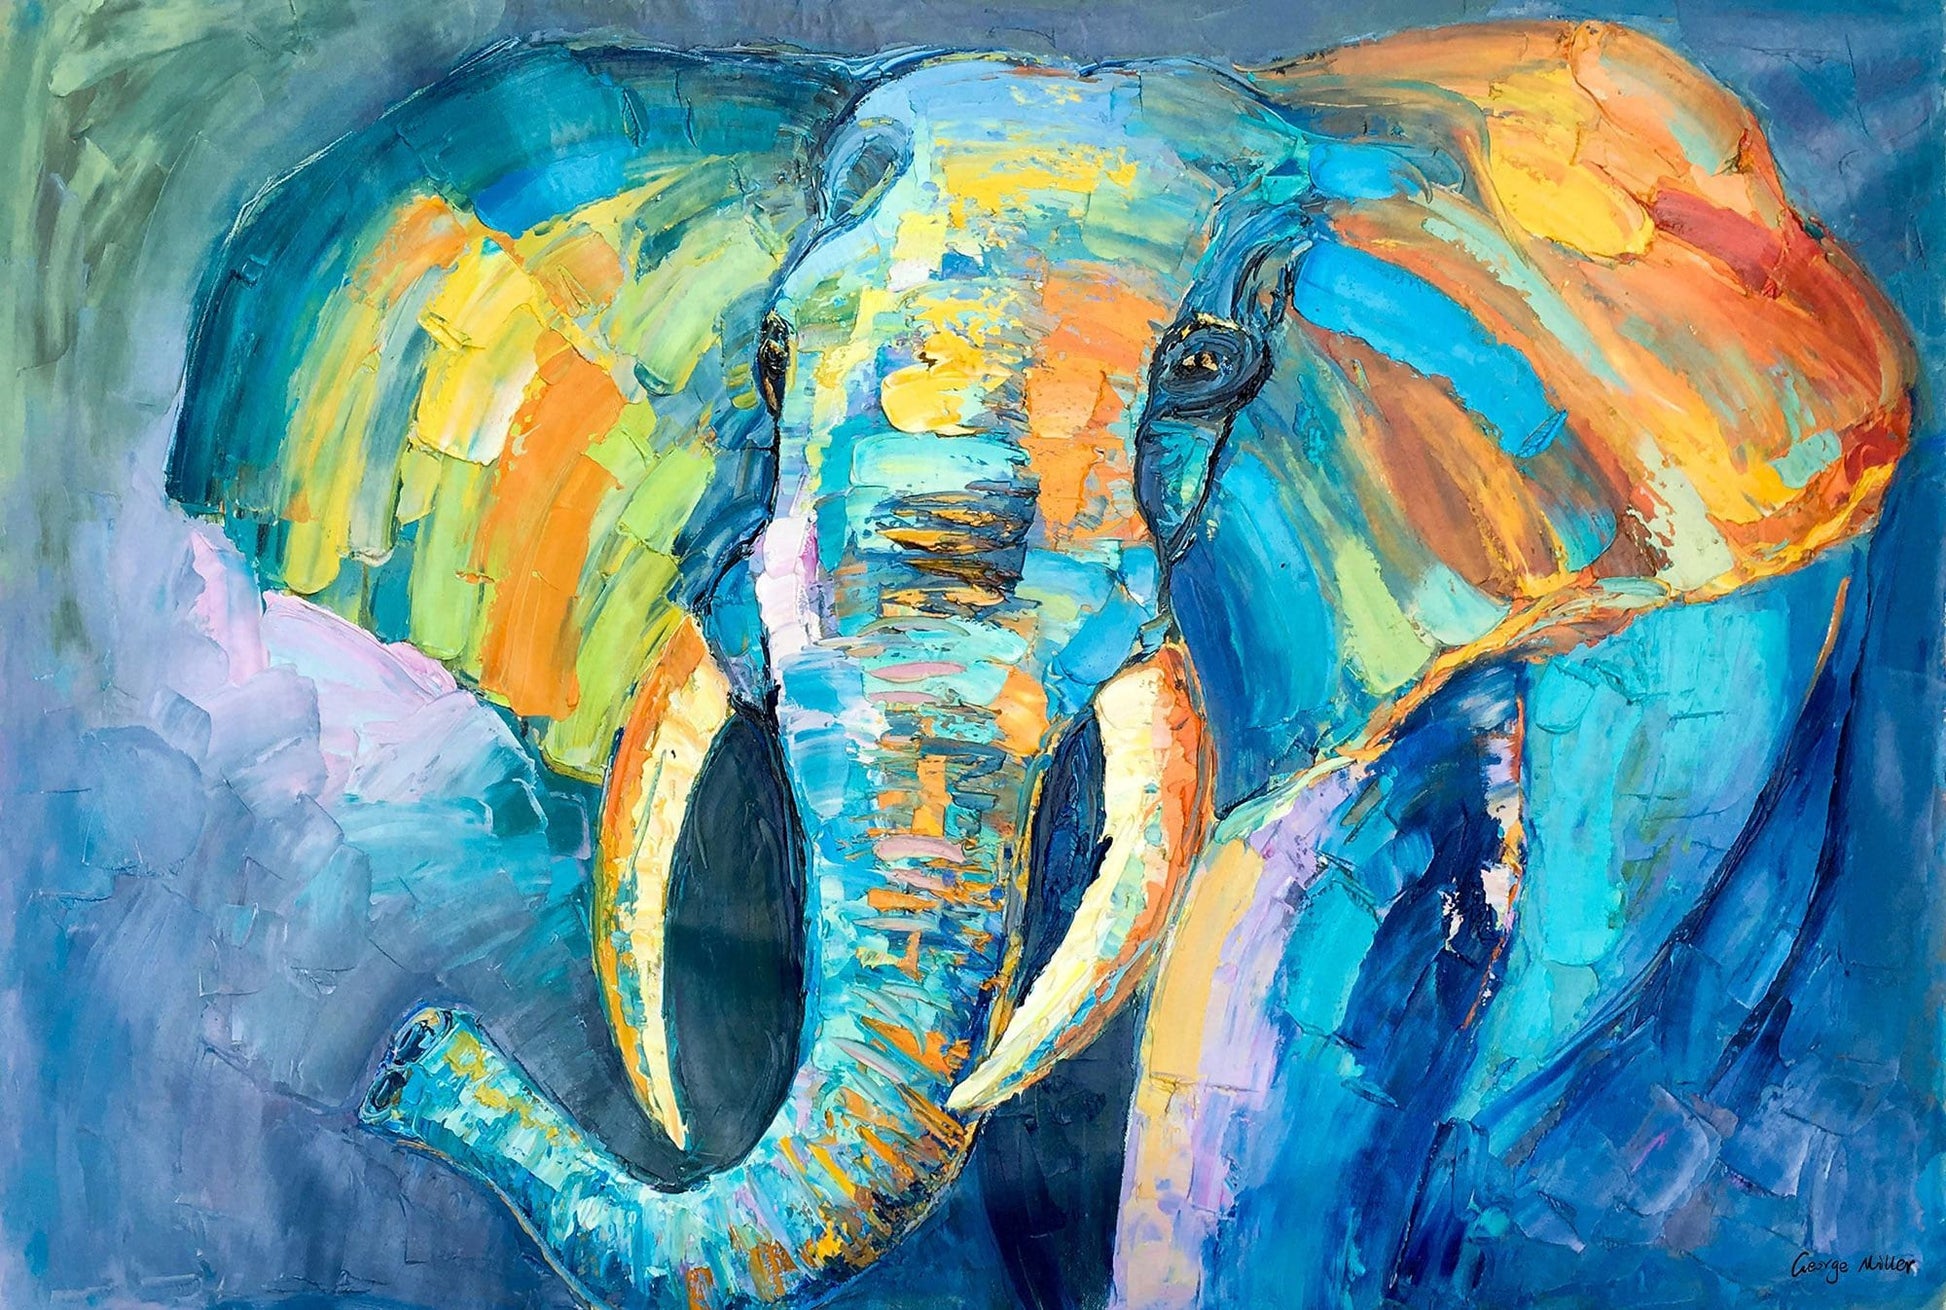 Large Canvas Wall Art, Oil Painting Original, Elephant Painting, Contemporary Art, Canvas Painting, Abstract Art, Large Abstract Art